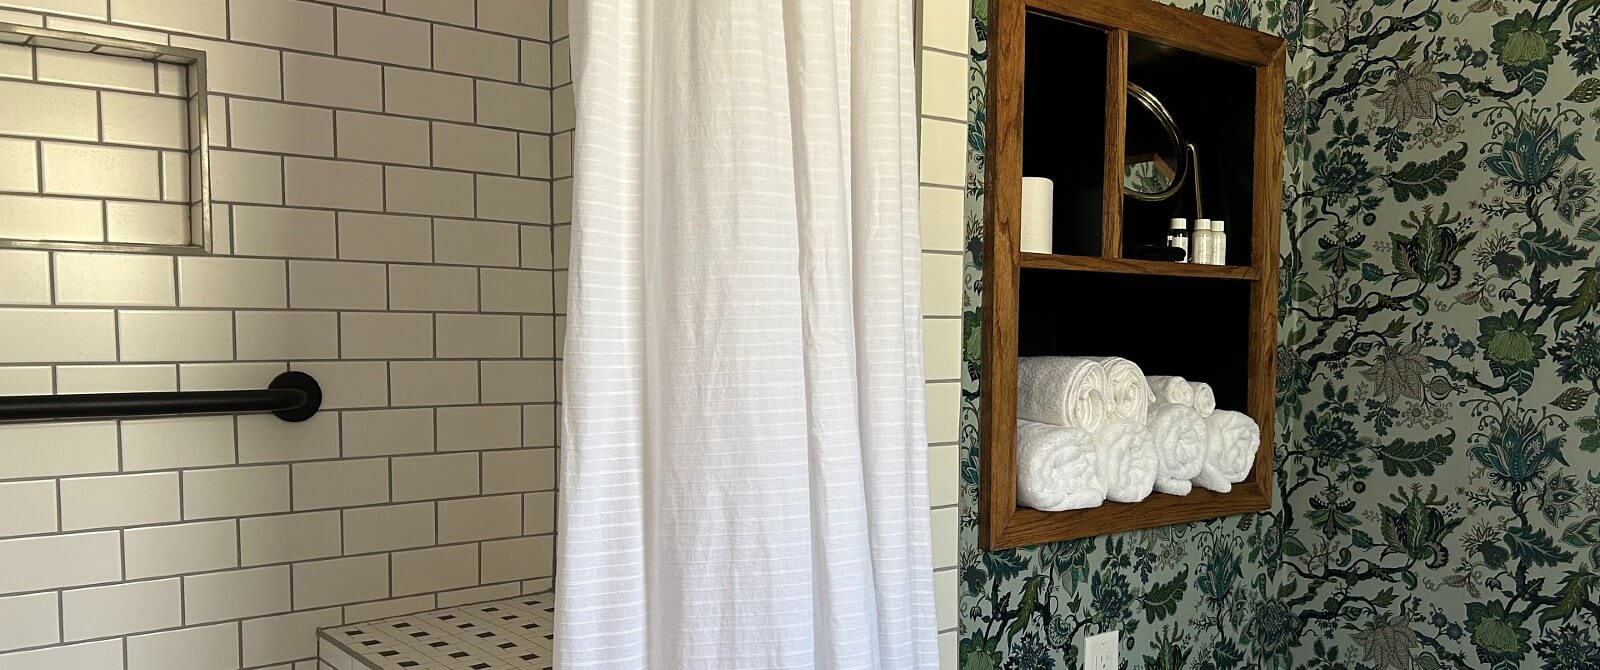 Bathroom with subway tiled shower, white curtain and built in cupboard surrounded by floral wallpaper